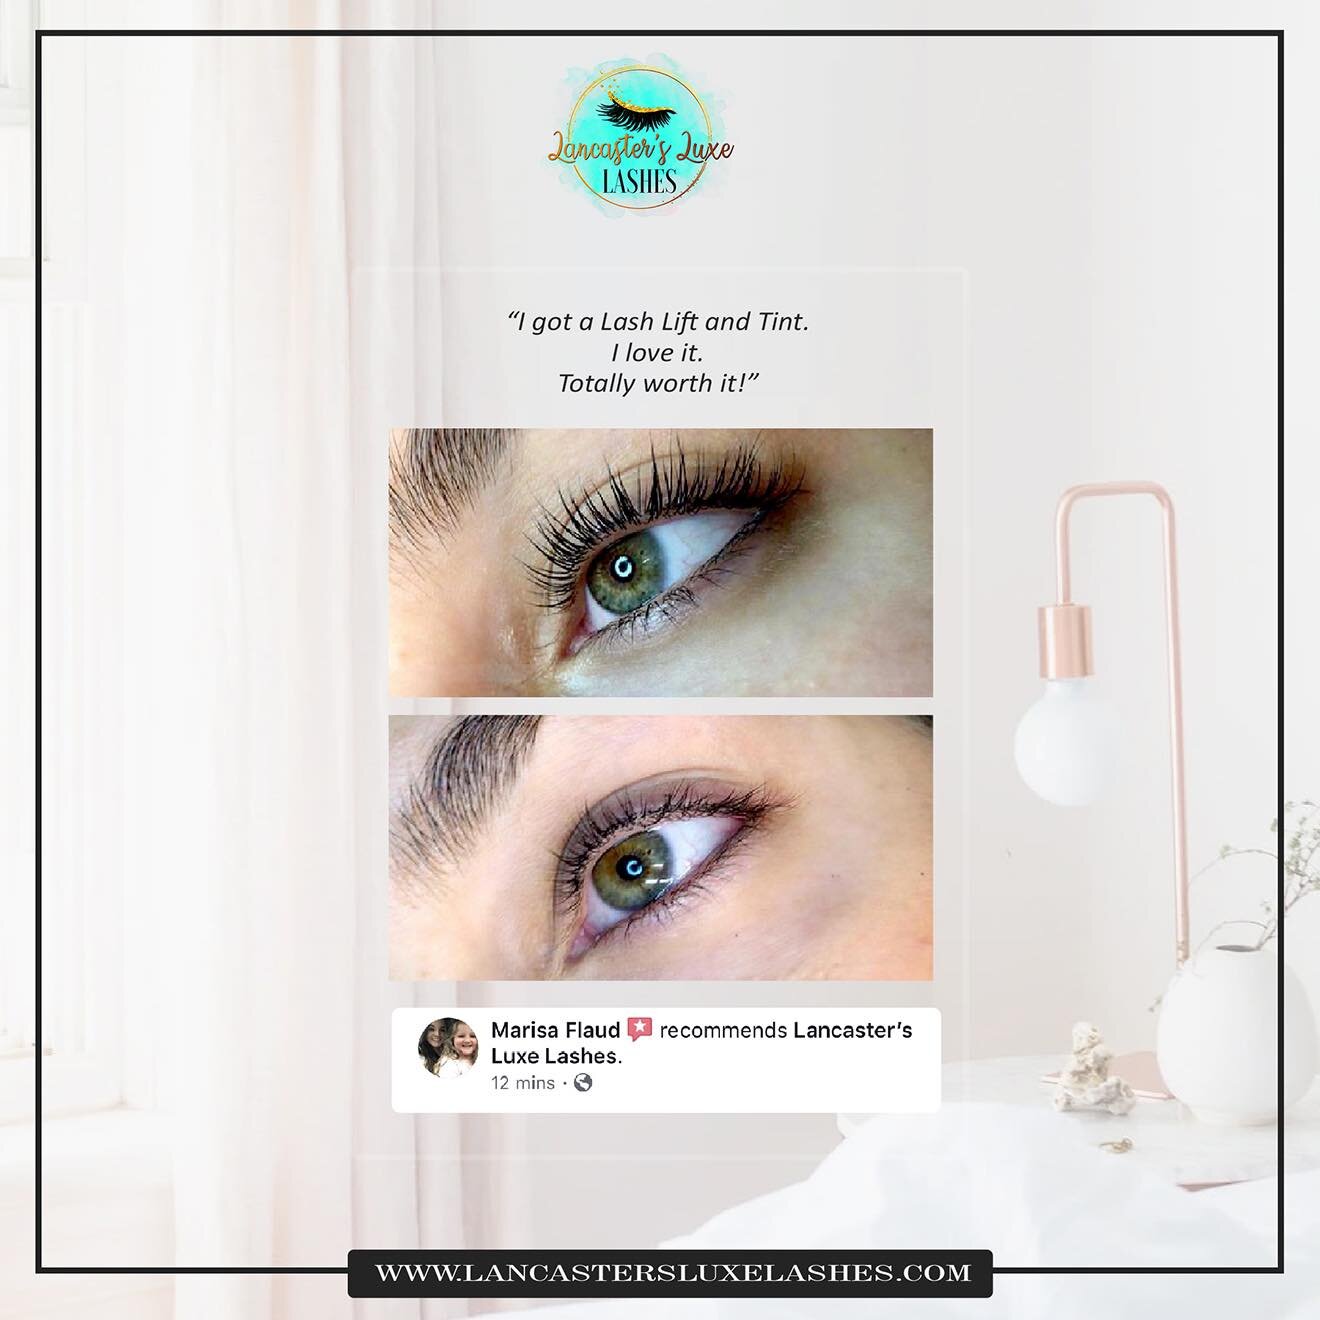 Lift and tints are perfect for less upkeep than extensions. A natural look. And no fuss waterproof makeup look. $125 with Jaime, who has done thousands of lift and tints. Just read a few reviews on Google. 😉

#waxingspecialist #lashtraining #browsfo